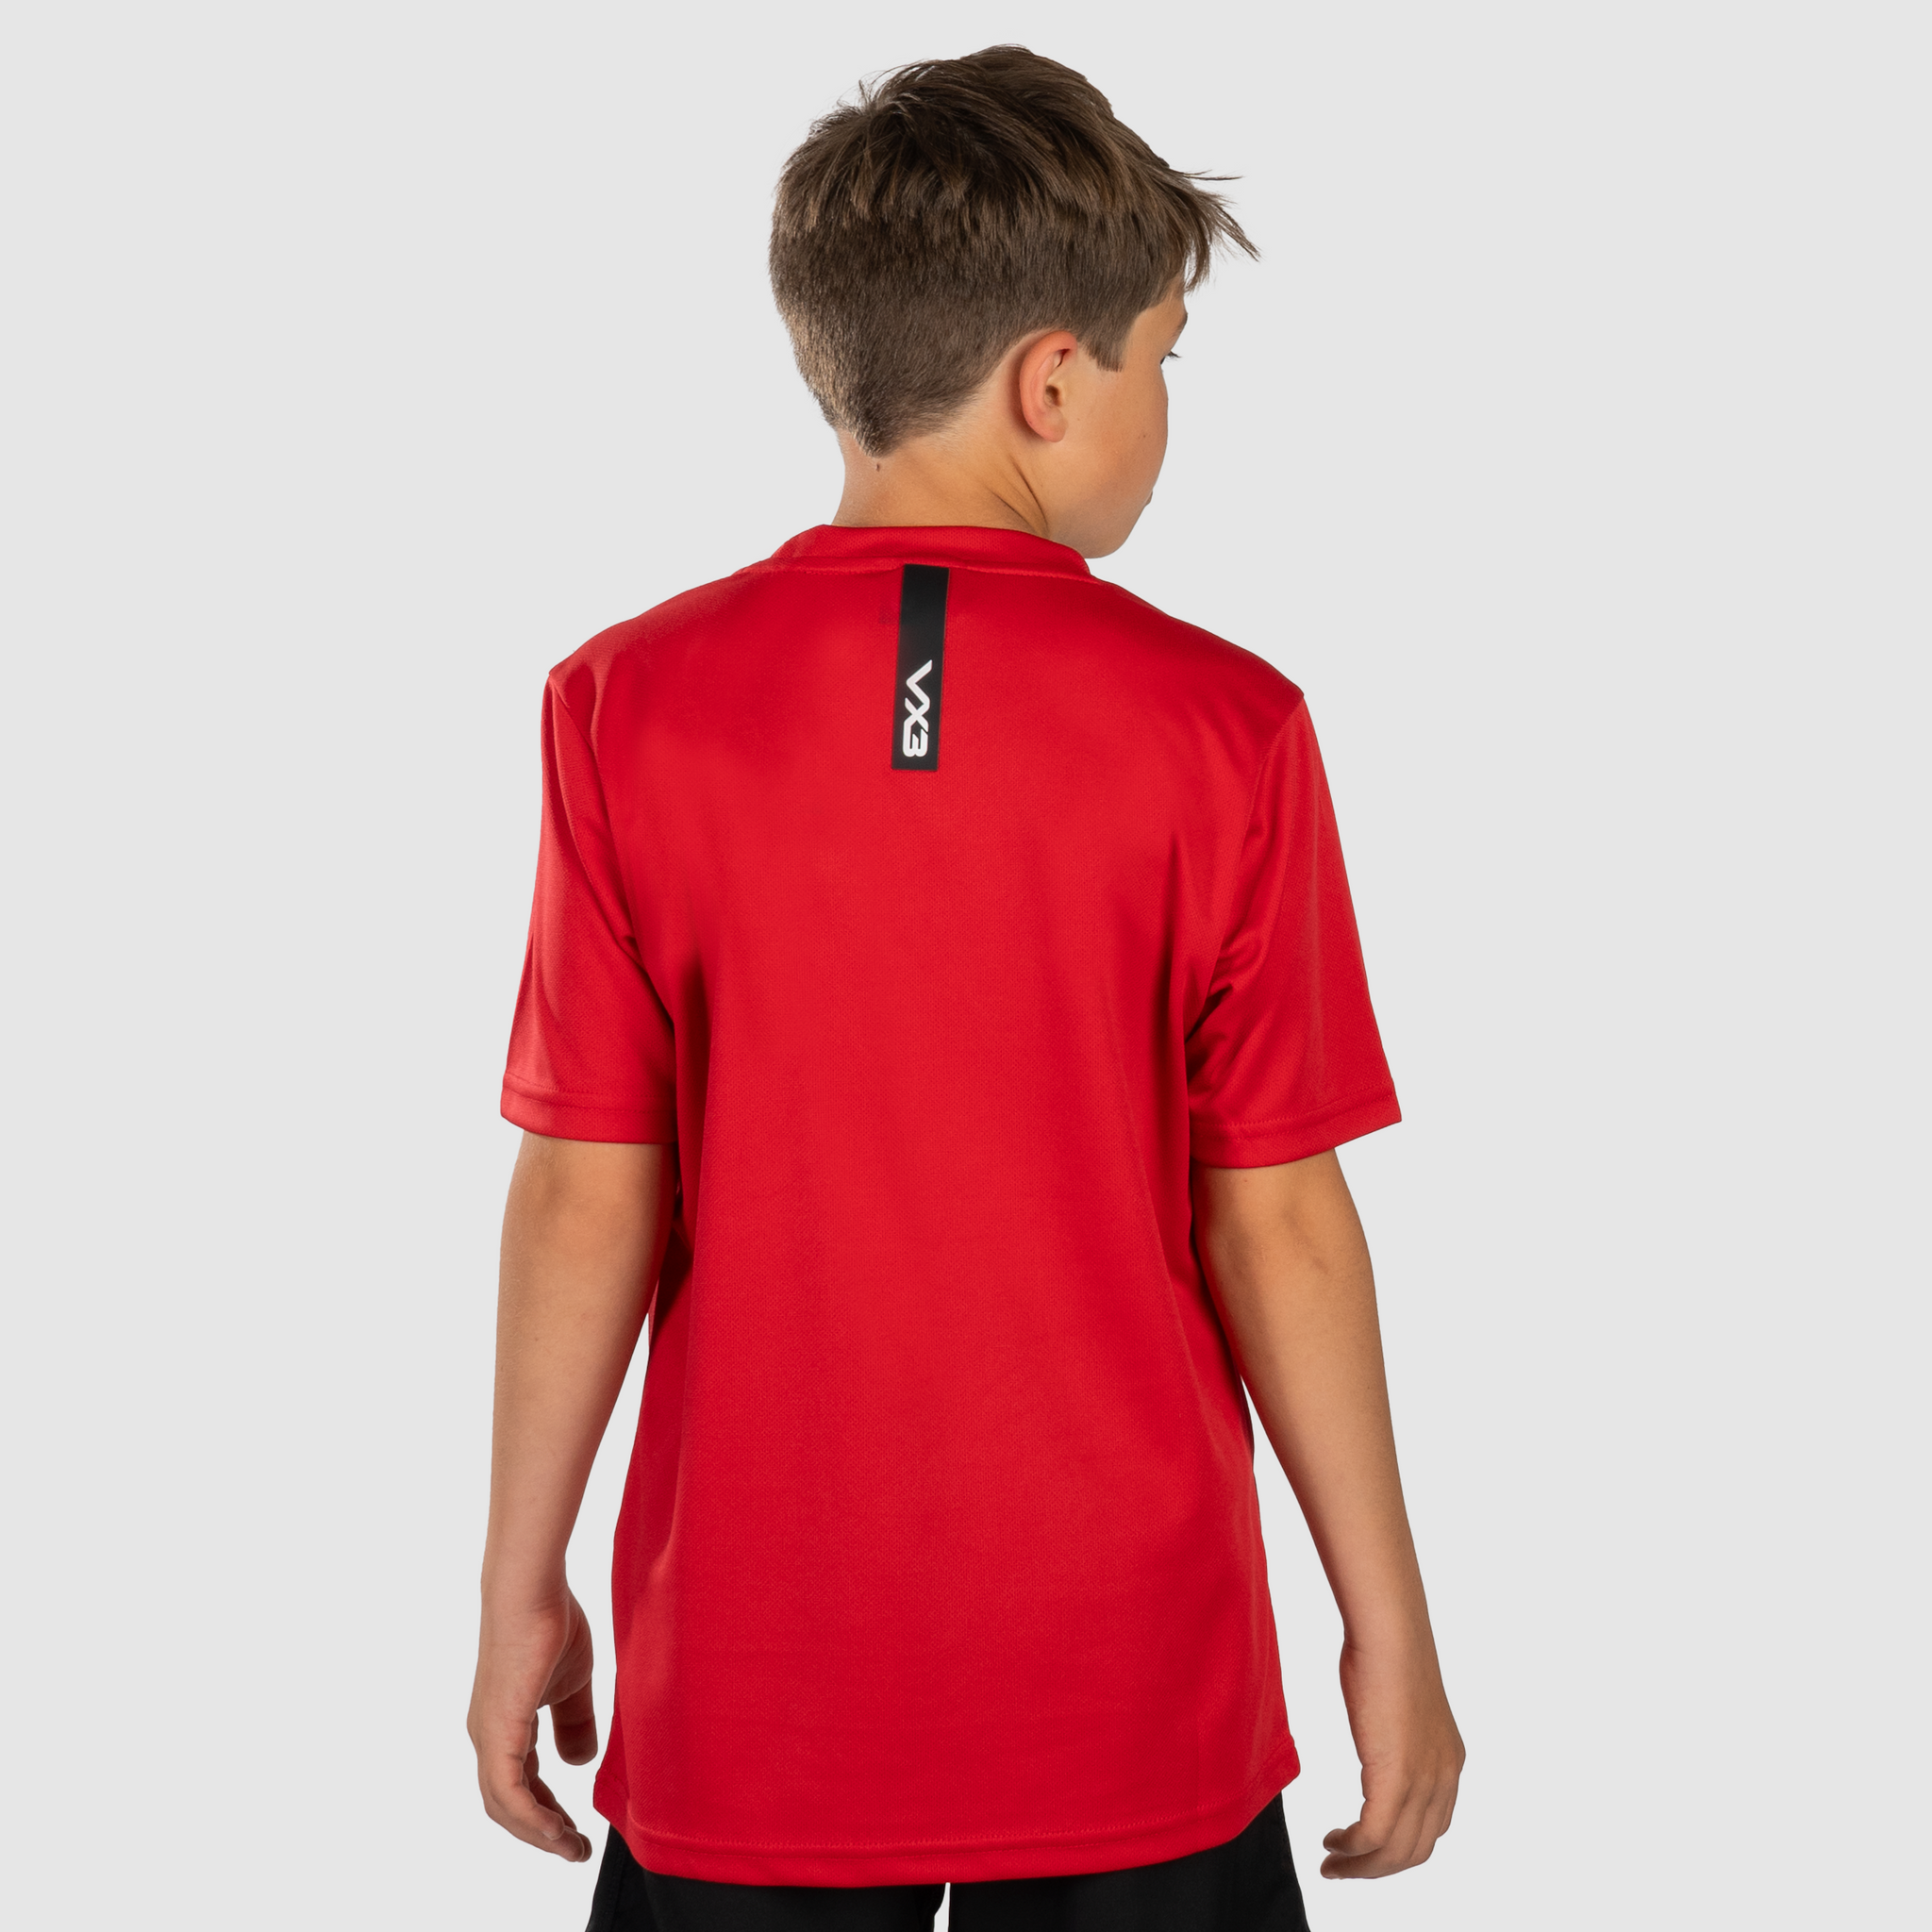 Fortis Youth Tee Red/Black